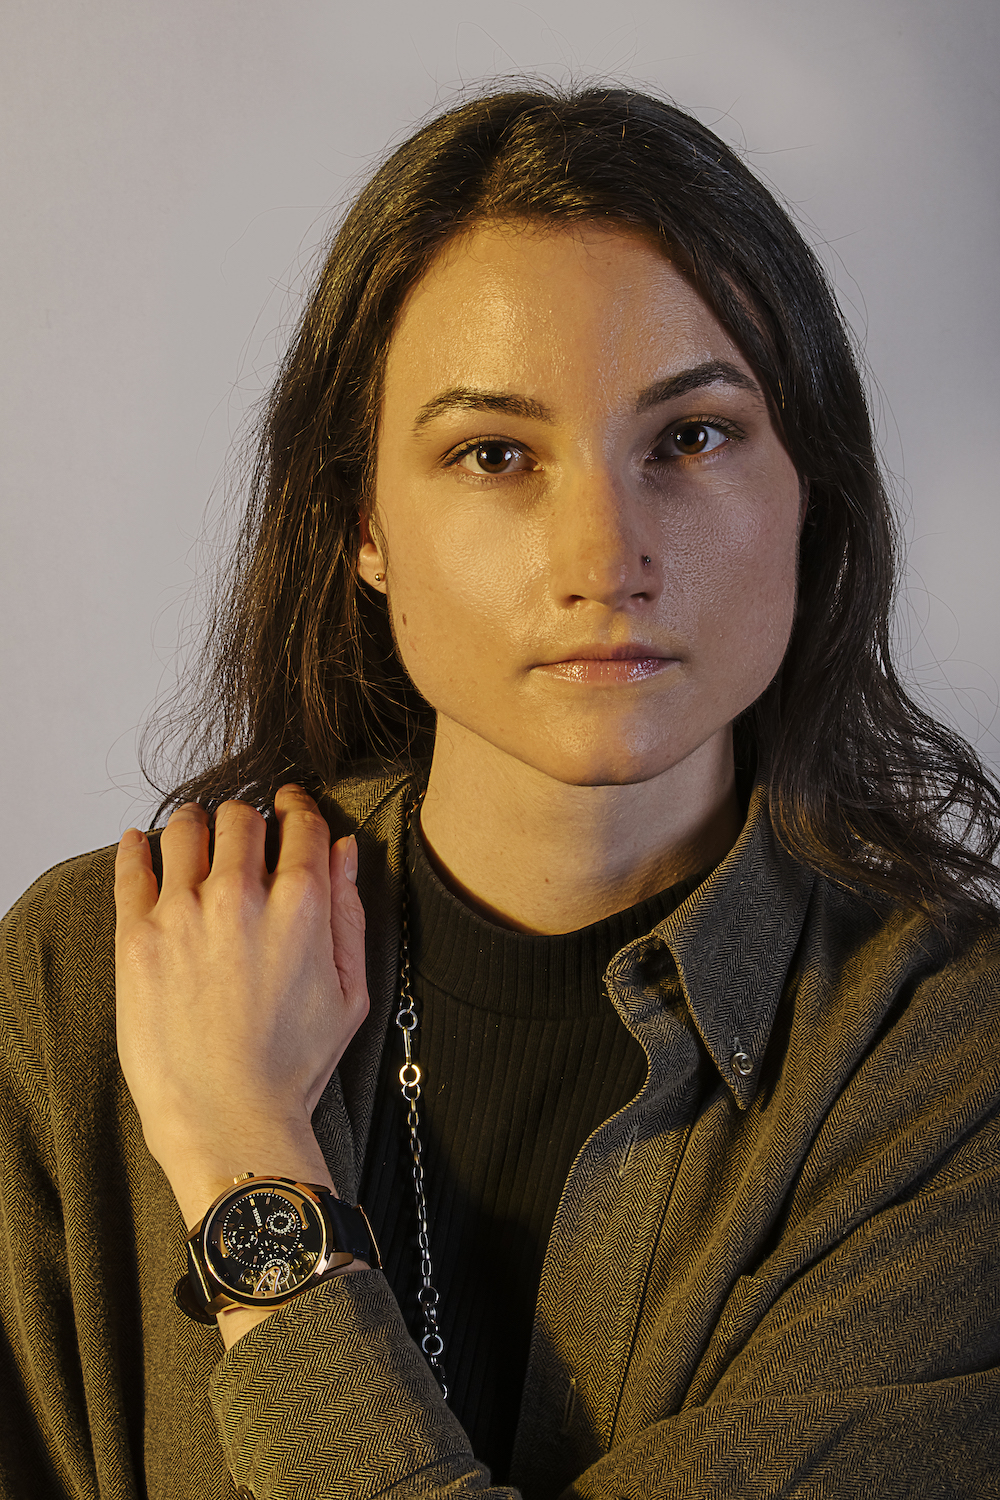 Studio portrait of young woman wearing fossil watch.